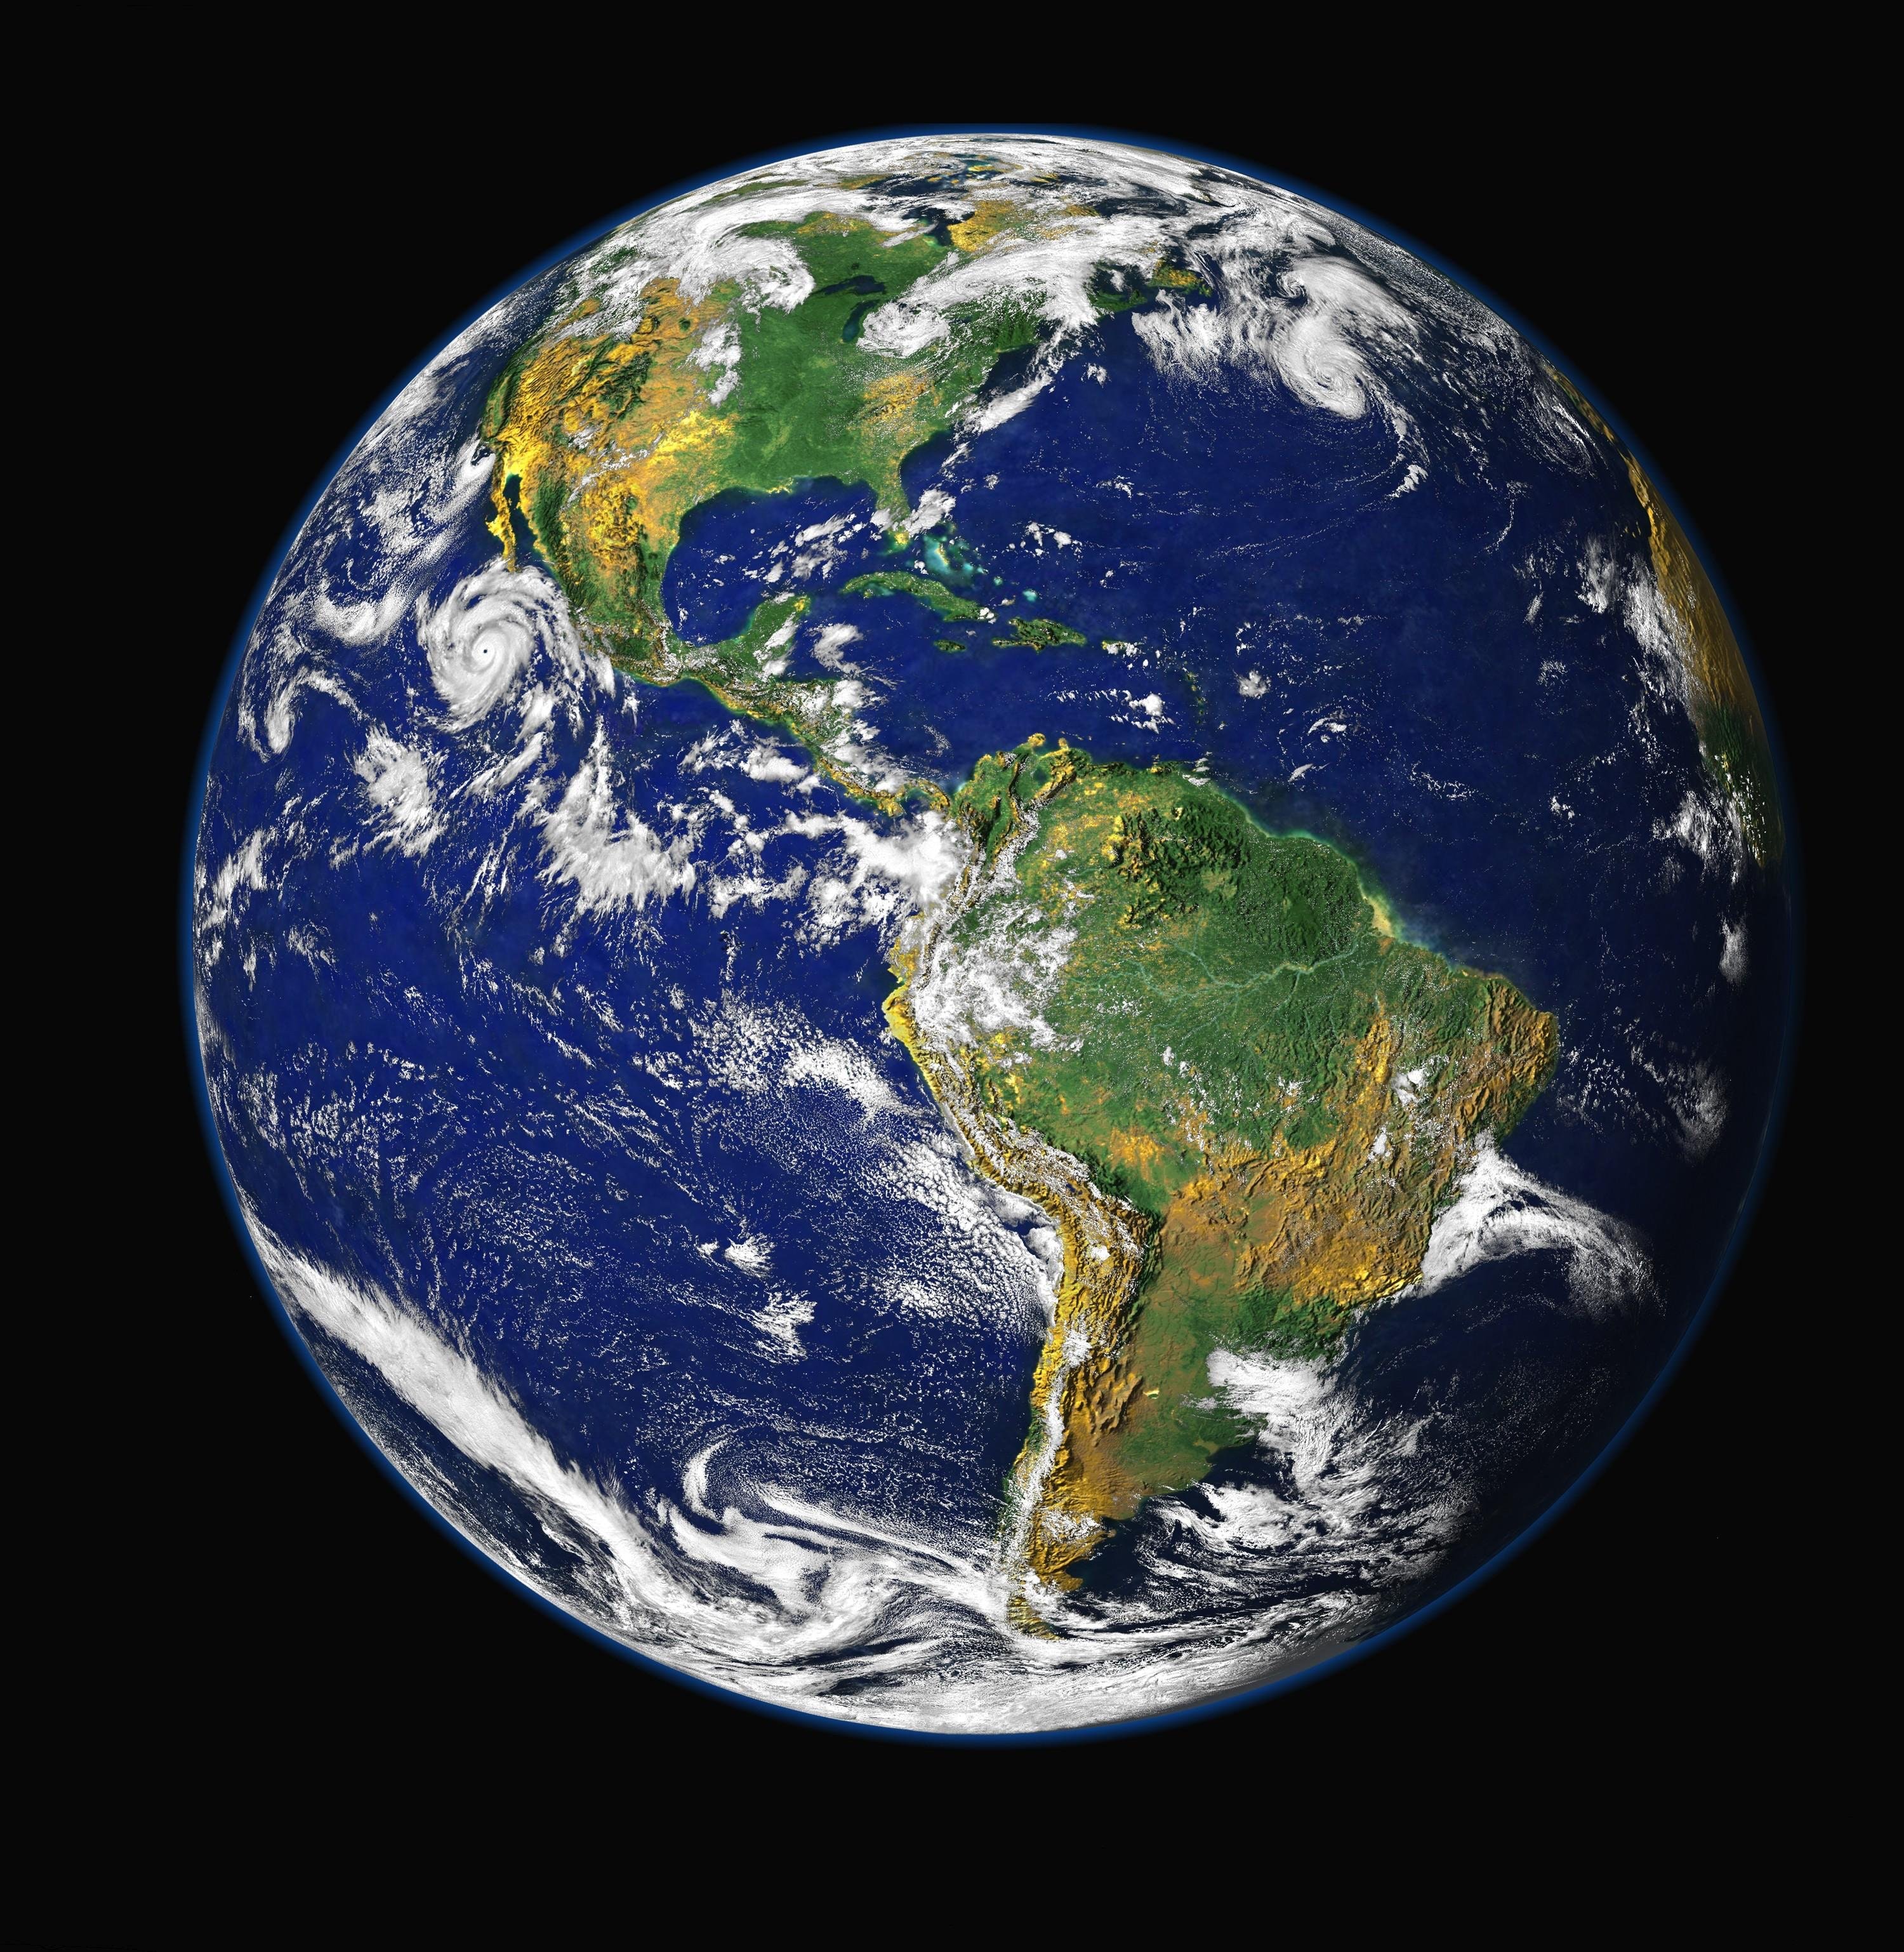 The Earth as seen from space